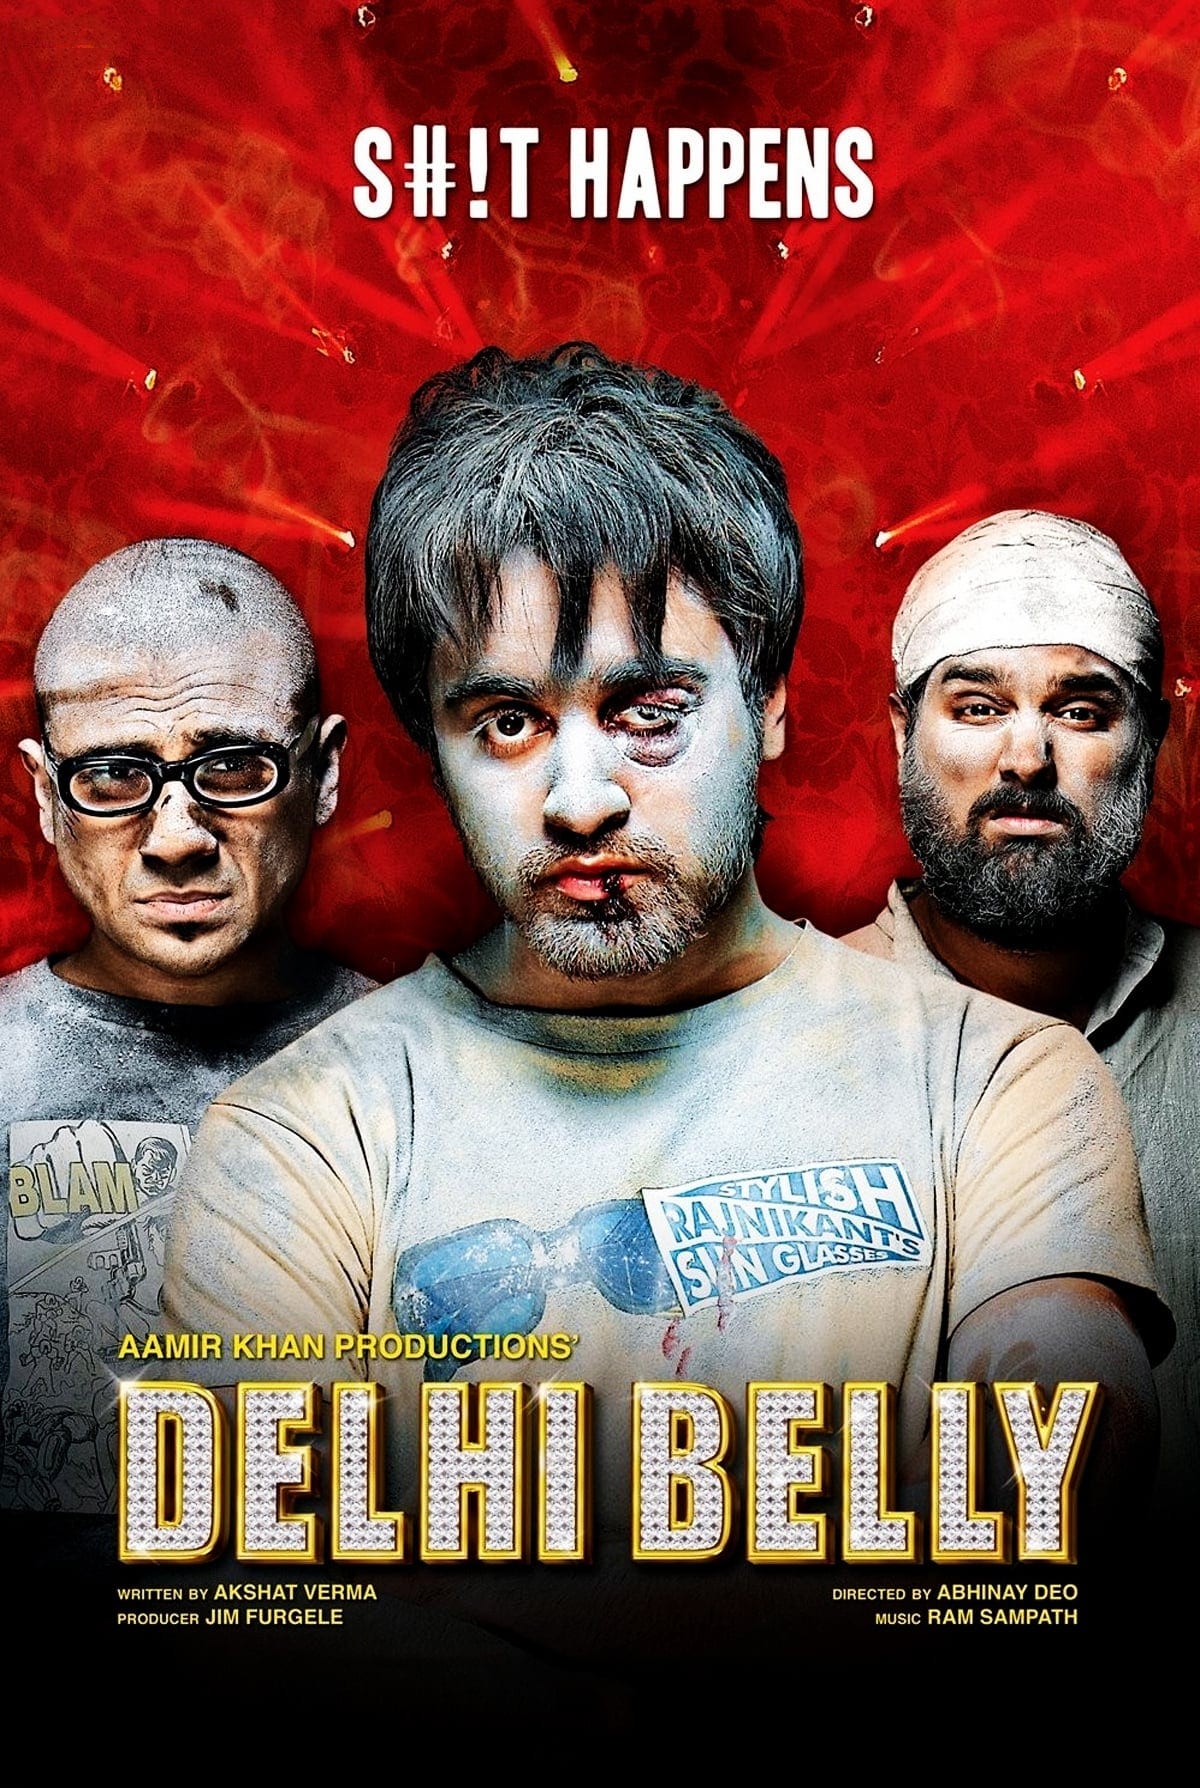 Poster for the movie "Delhi Belly"